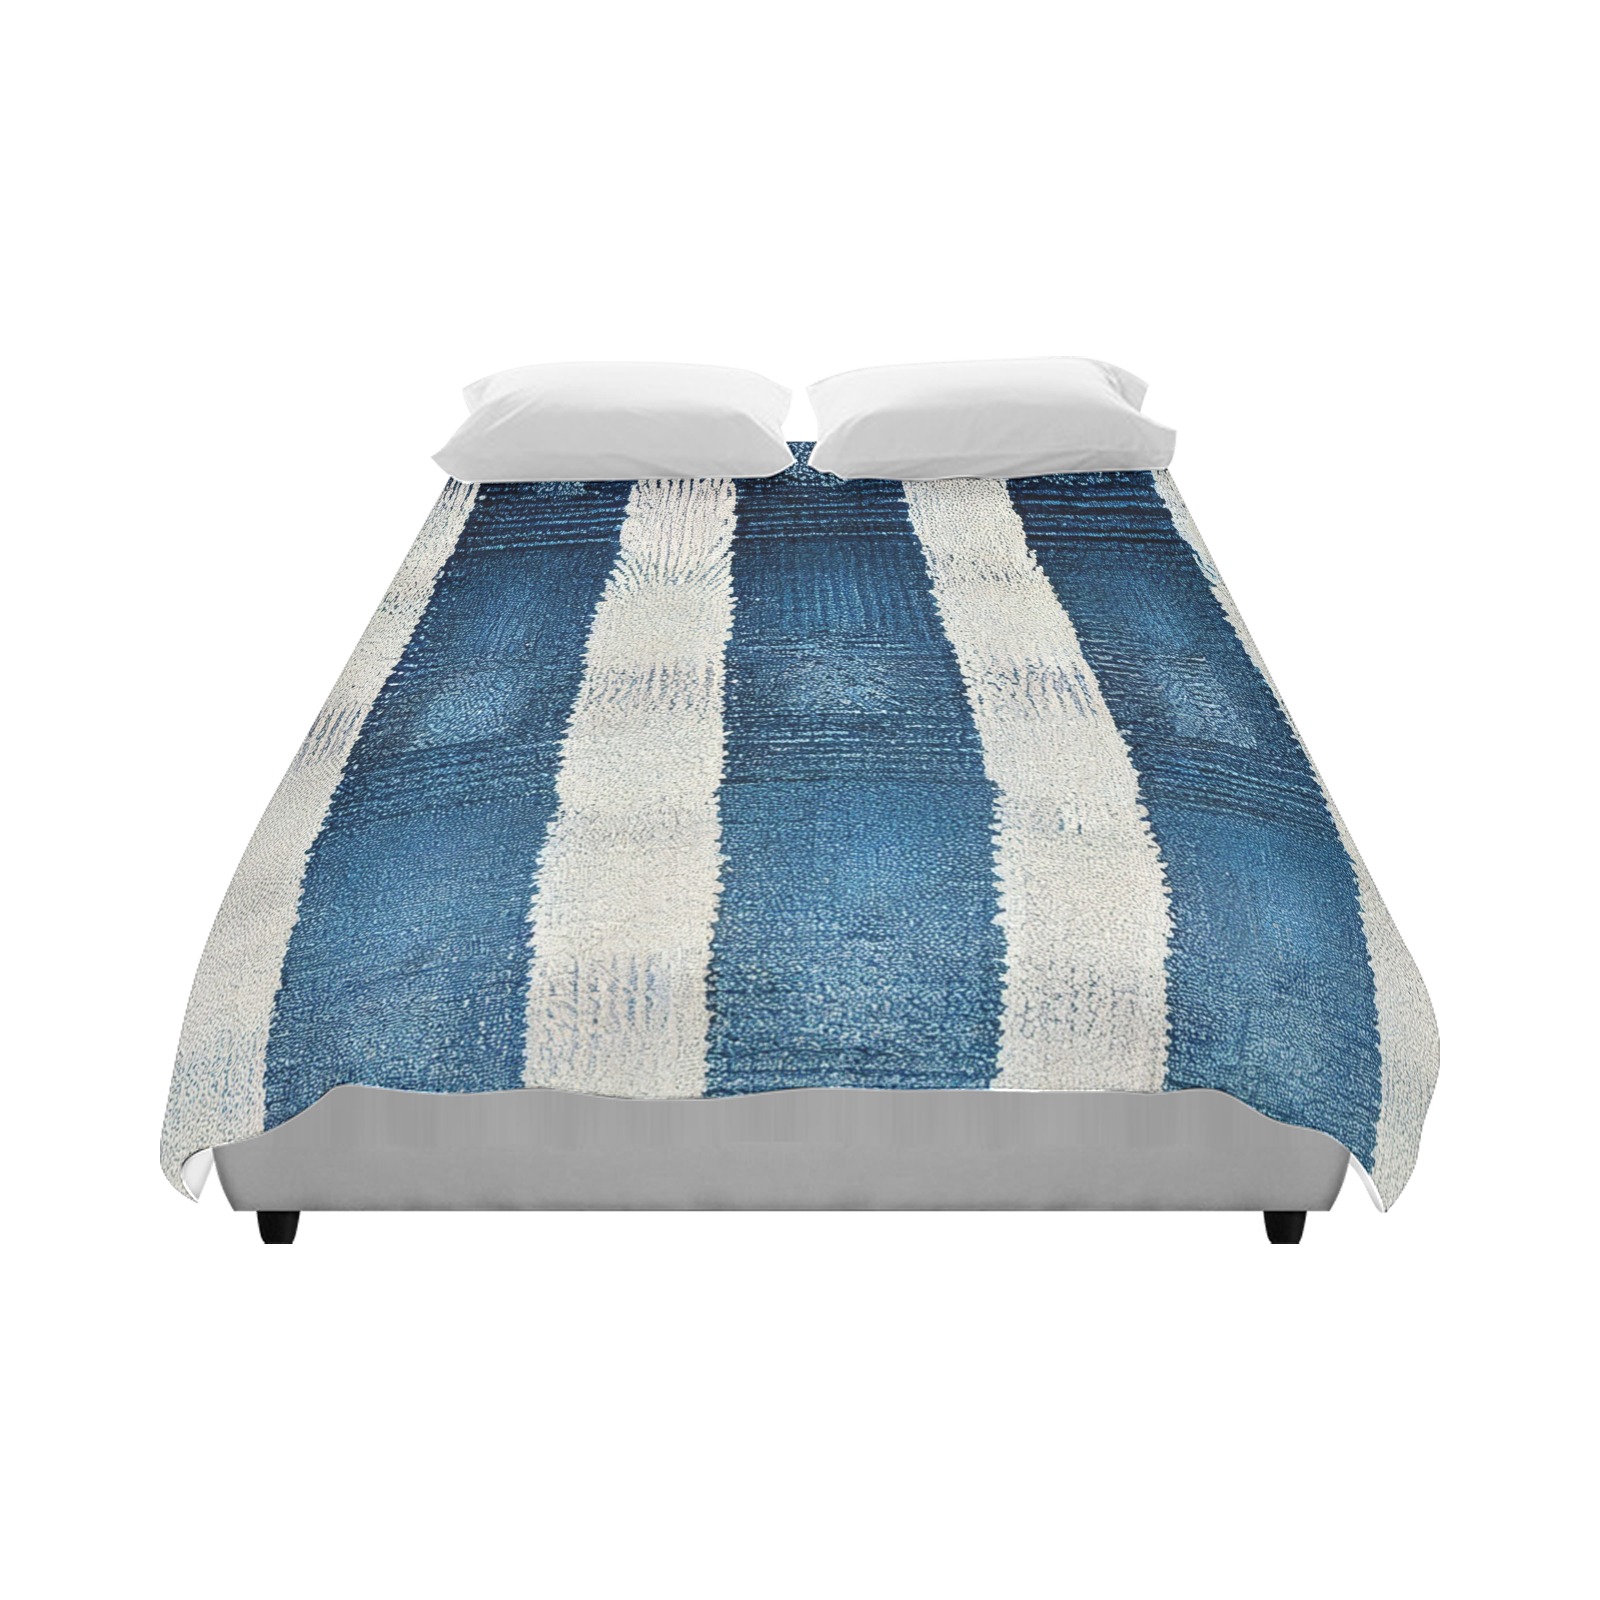 blue and white striped pattern Duvet Cover 86"x70" ( All-over-print)